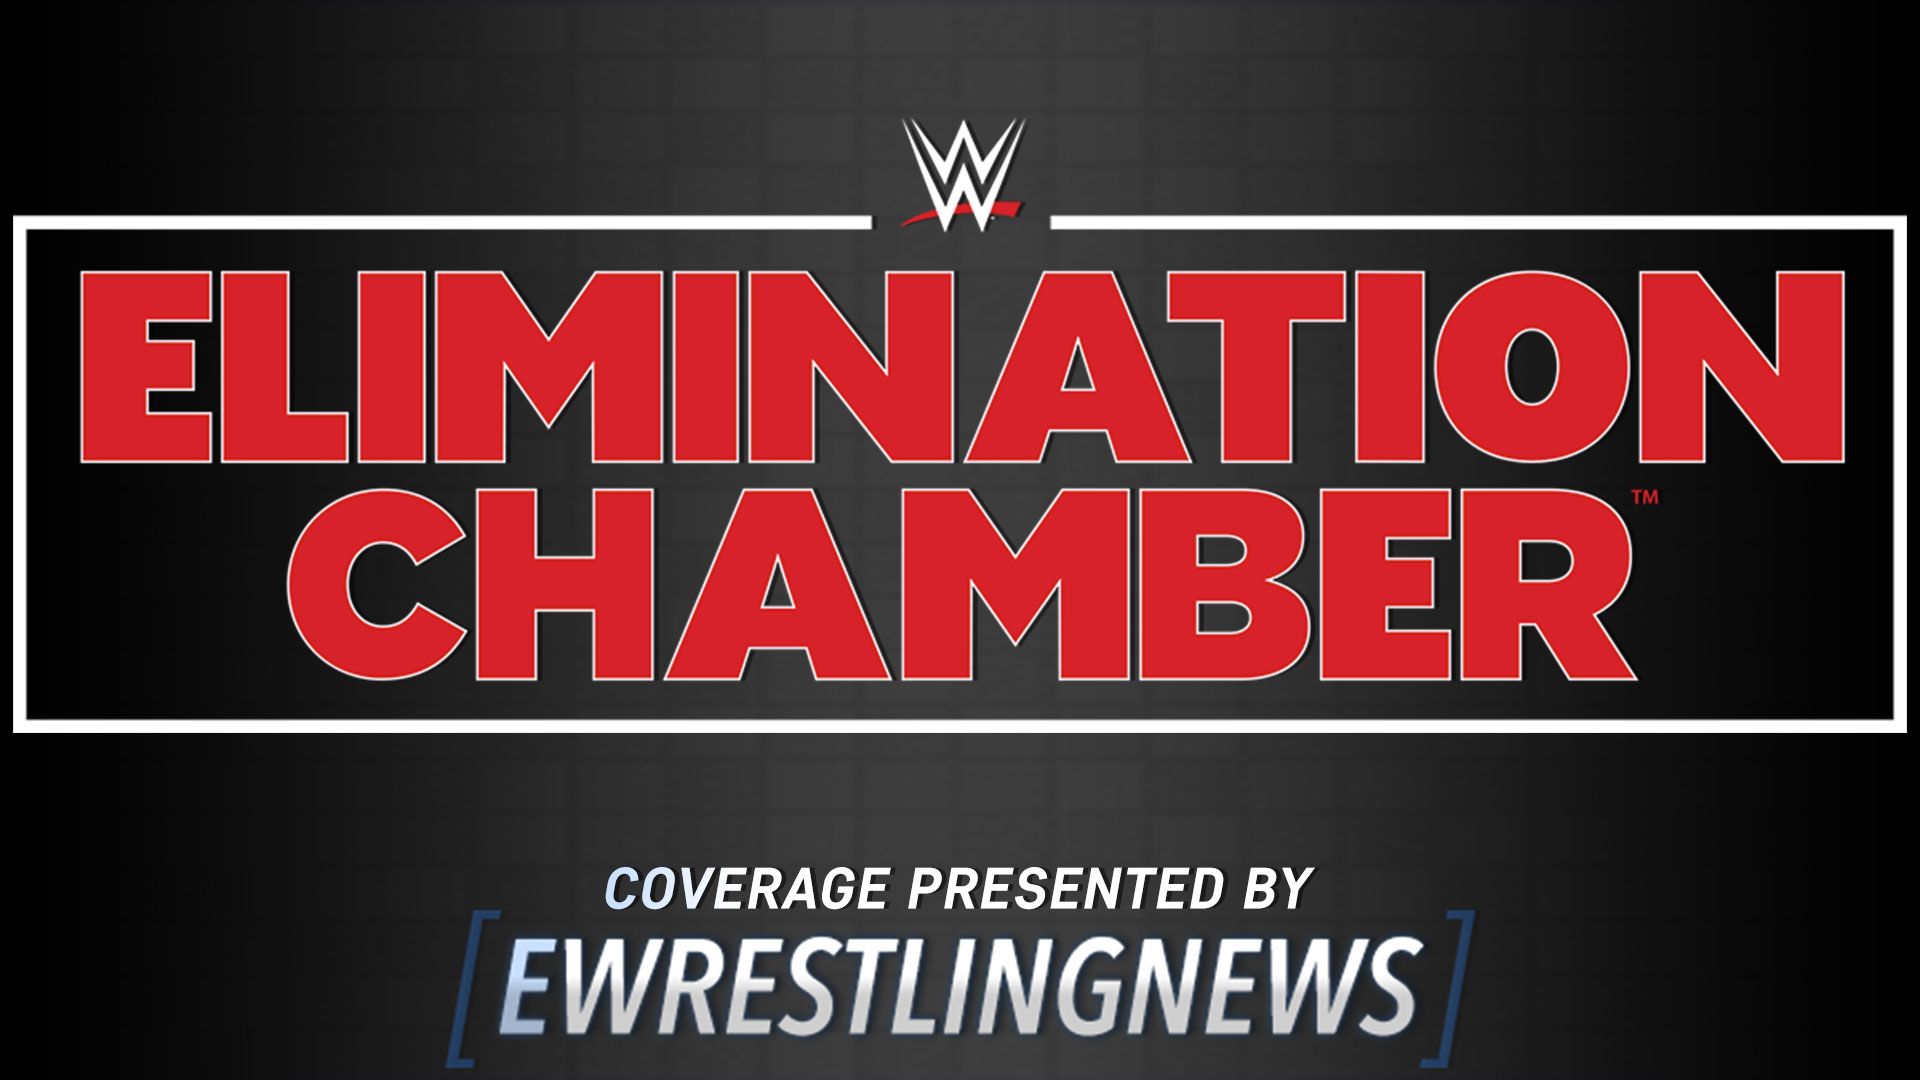 WWE Elimination Chamber Results: March 2020